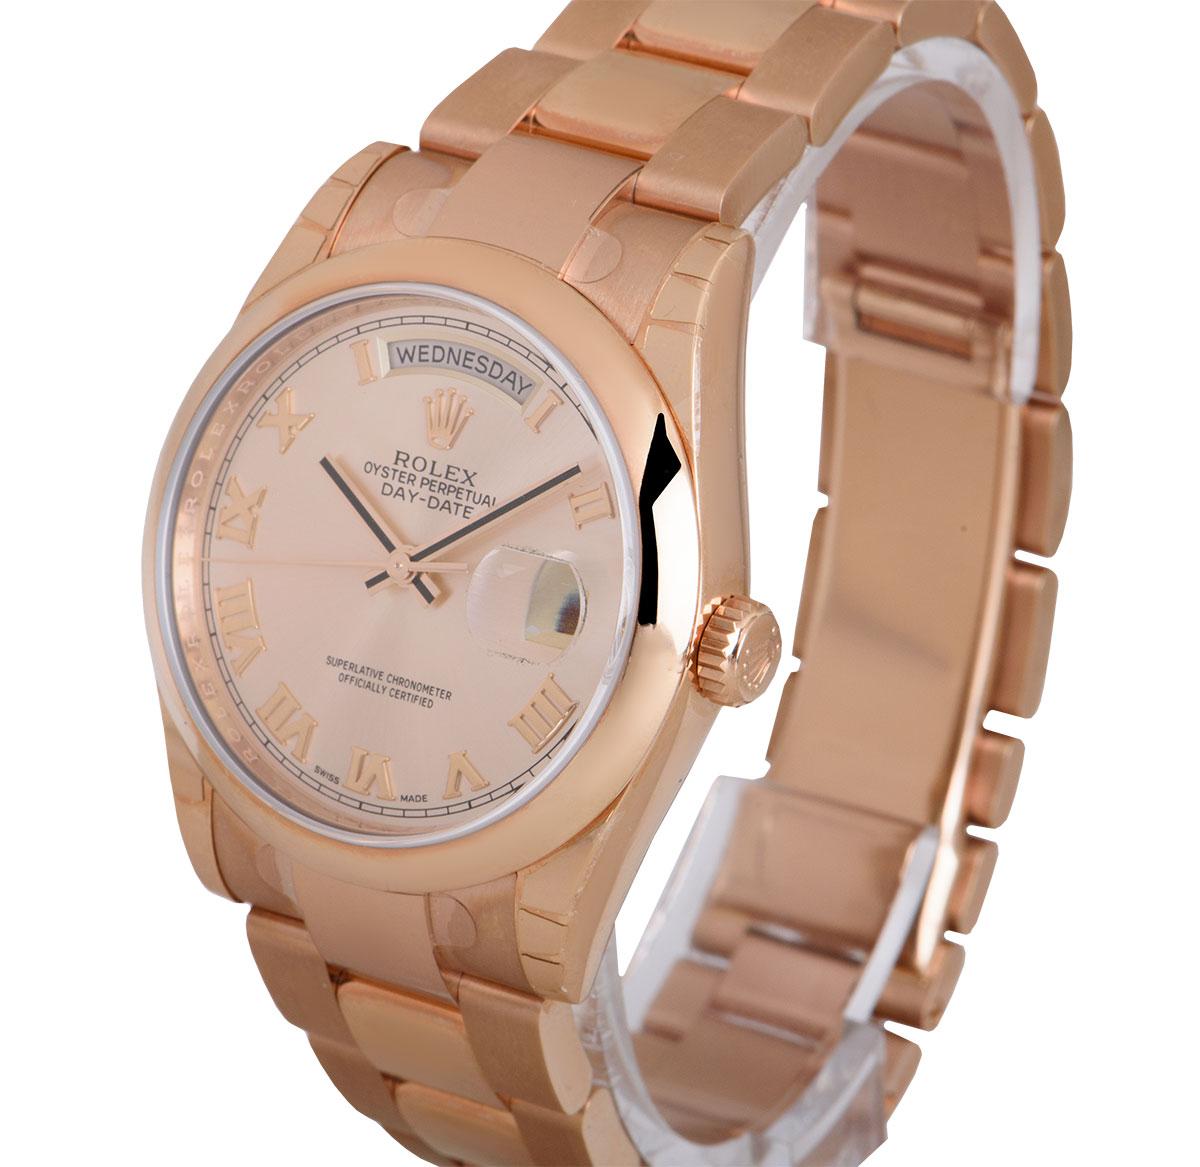 A 36 mm Unworn 18k Rose Gold Oyster Perpetual Day-Date 36 Gents Wristwatch, rose dial with applied roman numerals, day at 12 0'clock, date at 3 0'clock, a fixed 18k rose gold smooth bezel, an 18k rose gold oyster bracelet with a concealed 18k rose